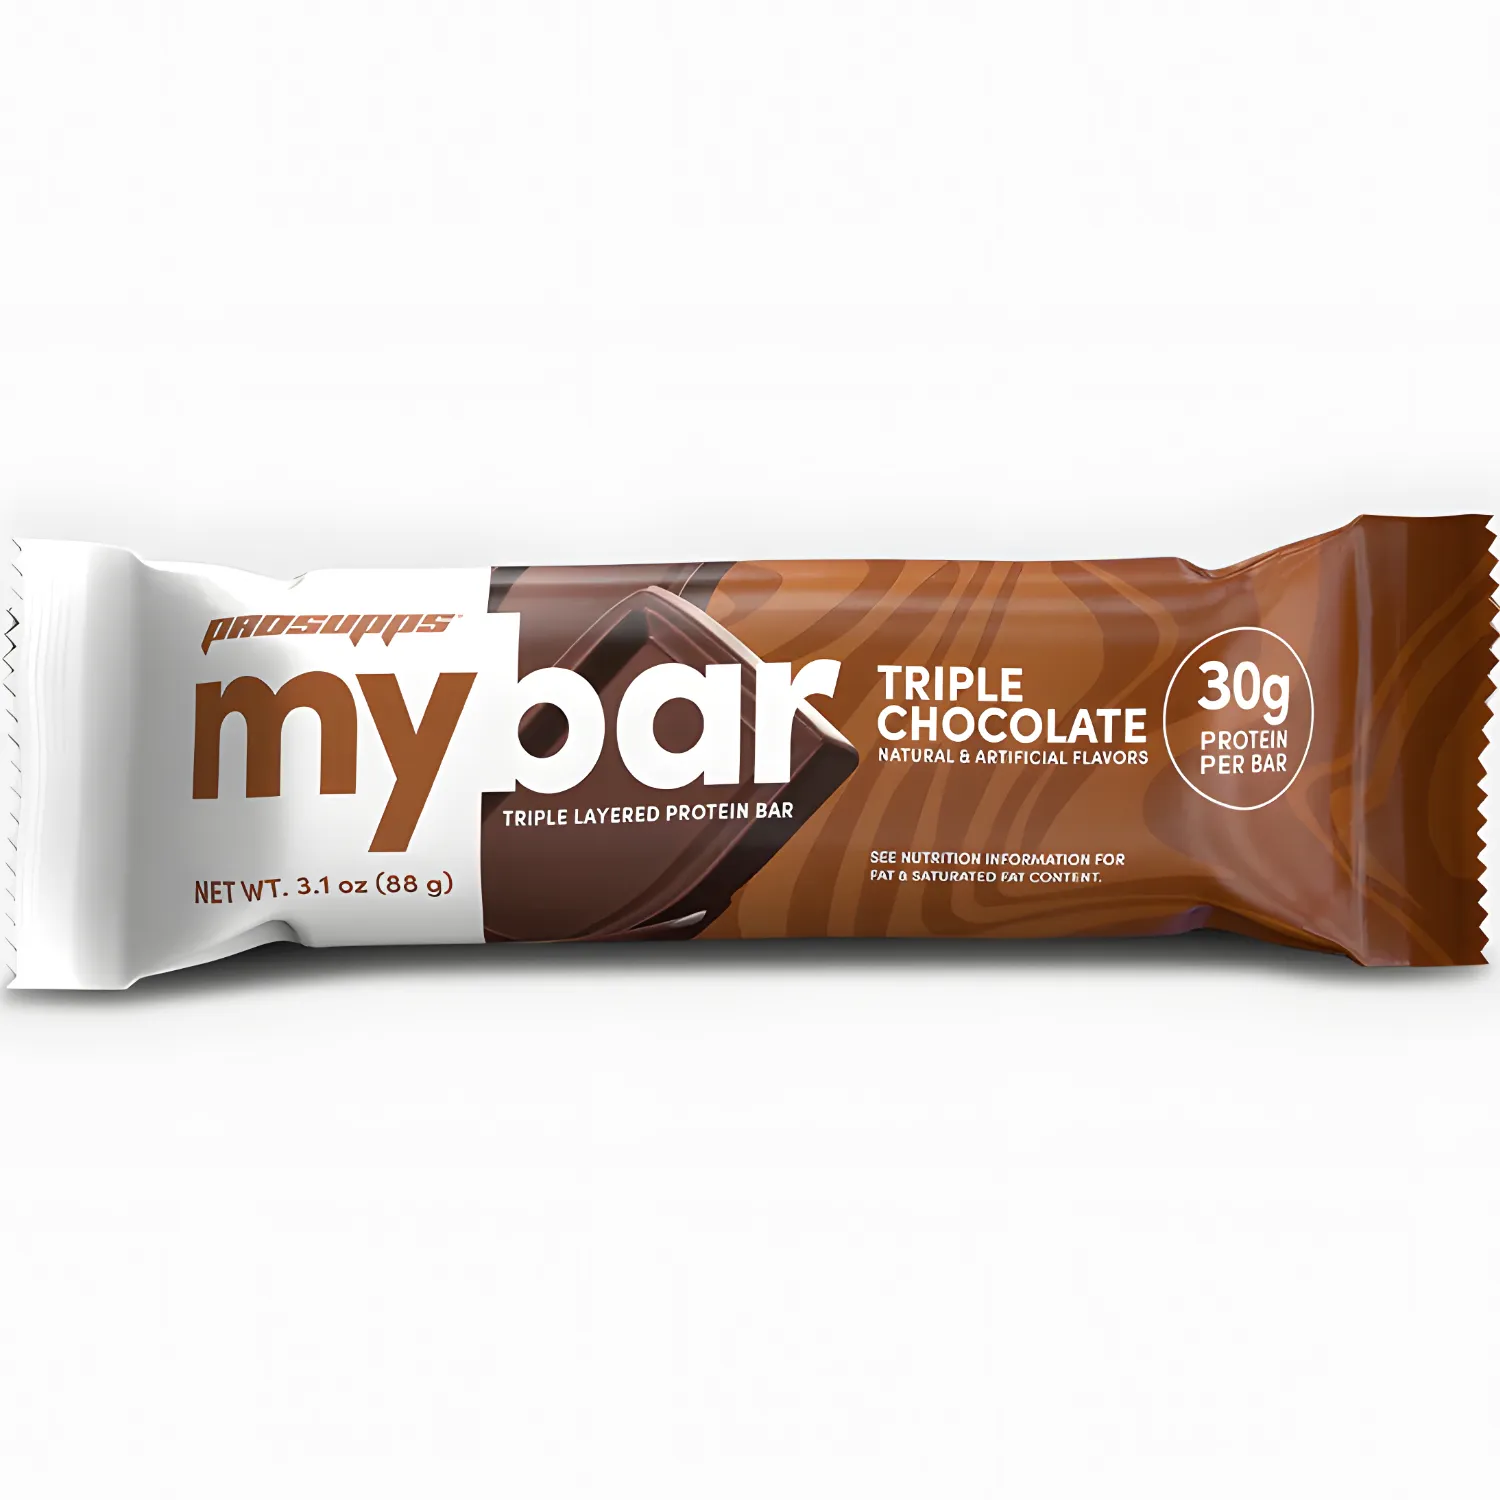 Free Prosupps Mybar Protein Bars After Rebate